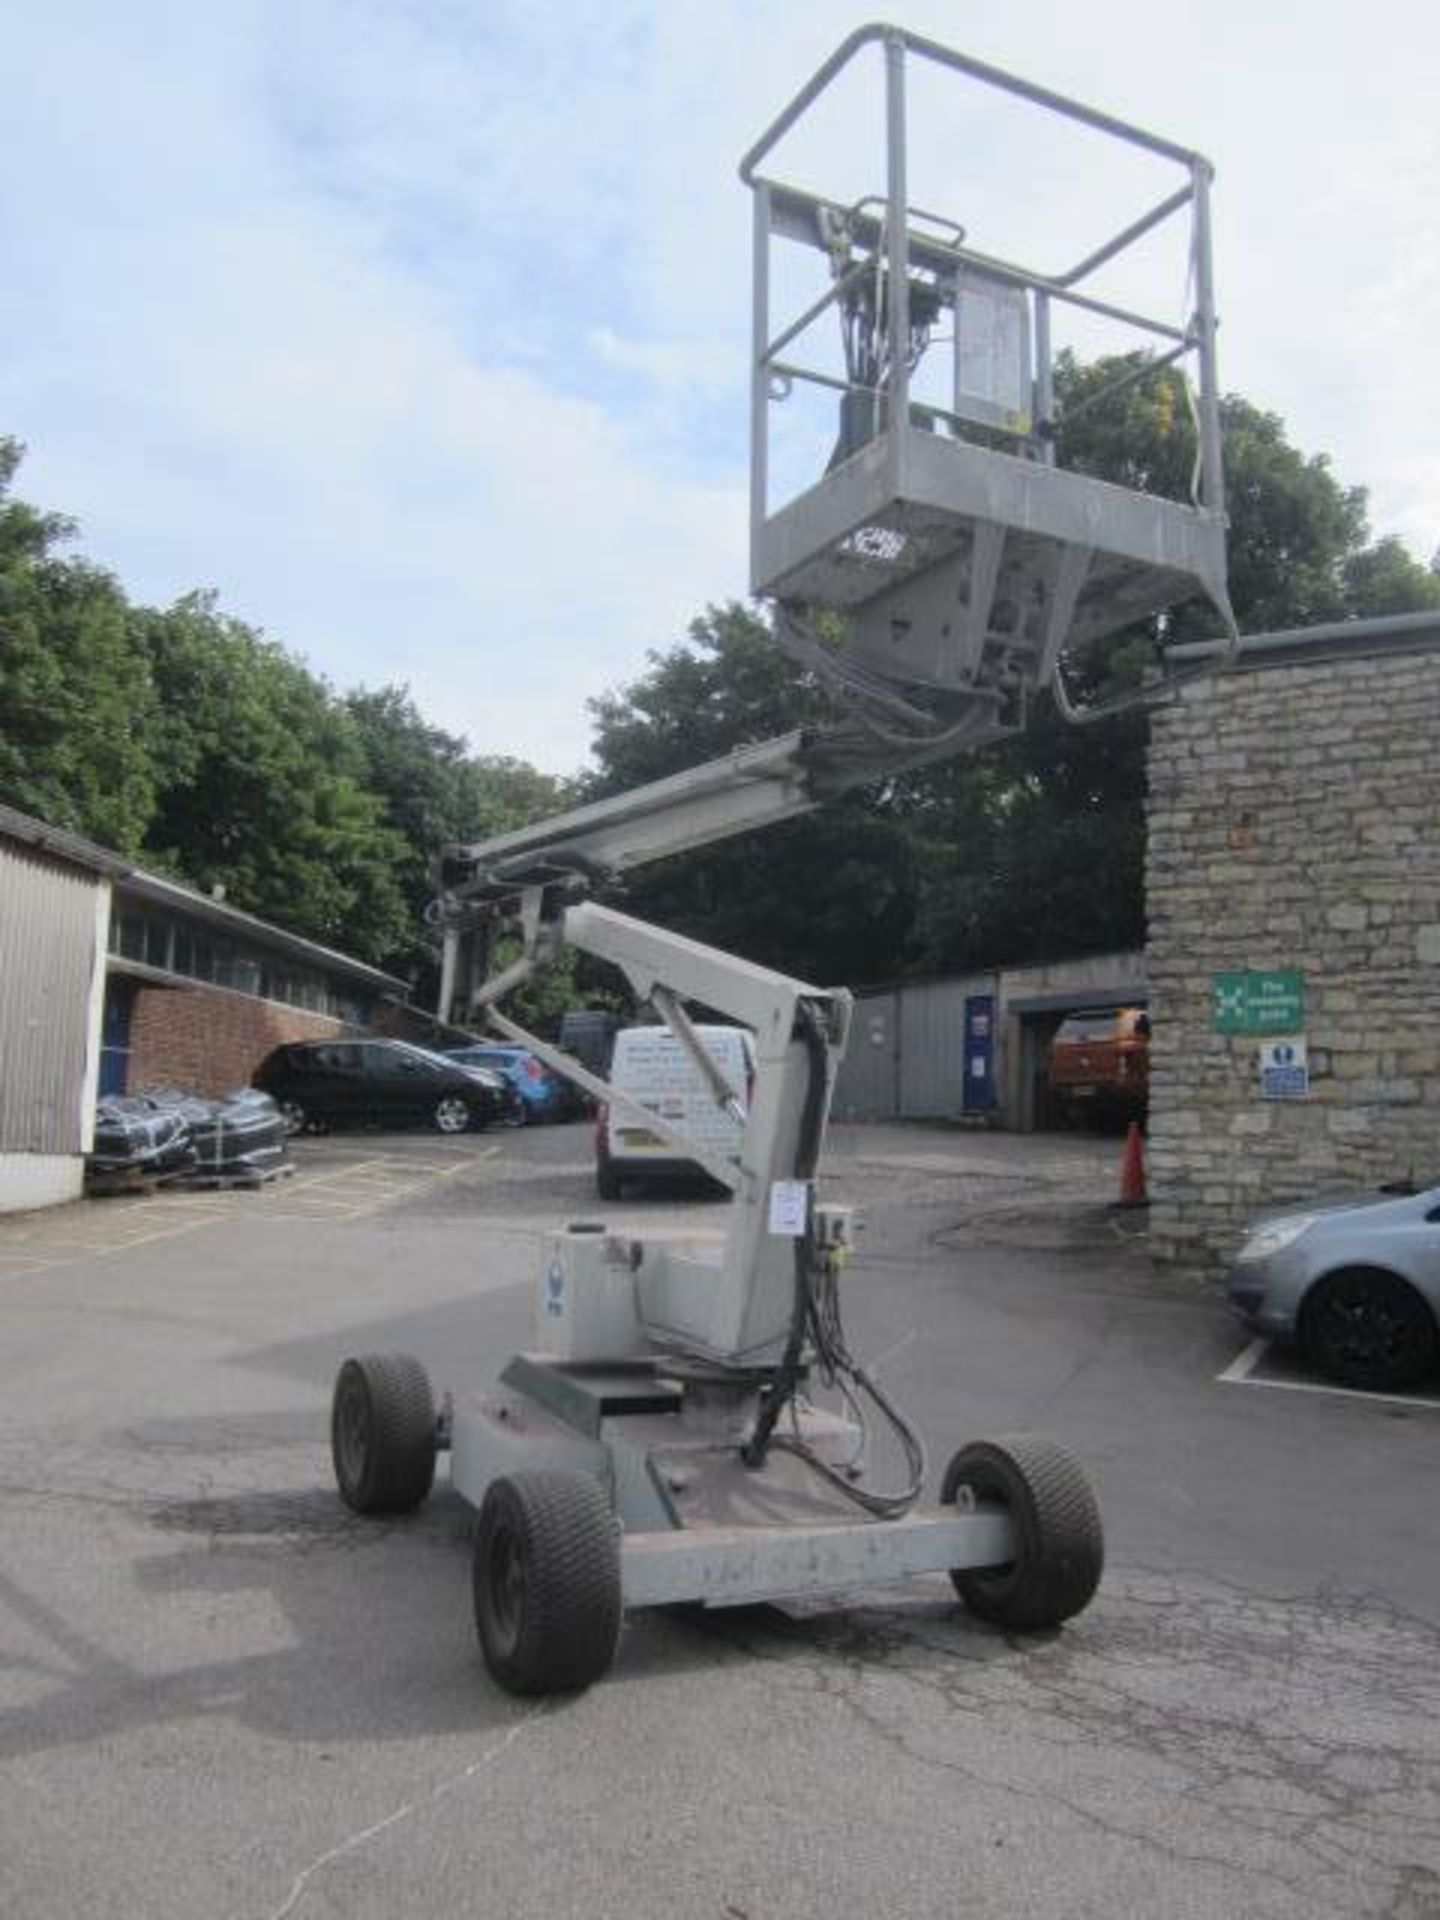 Nifty Lift HR12 battery powered cherry picker, serial no. 122121 (1992), rated load 2 person/